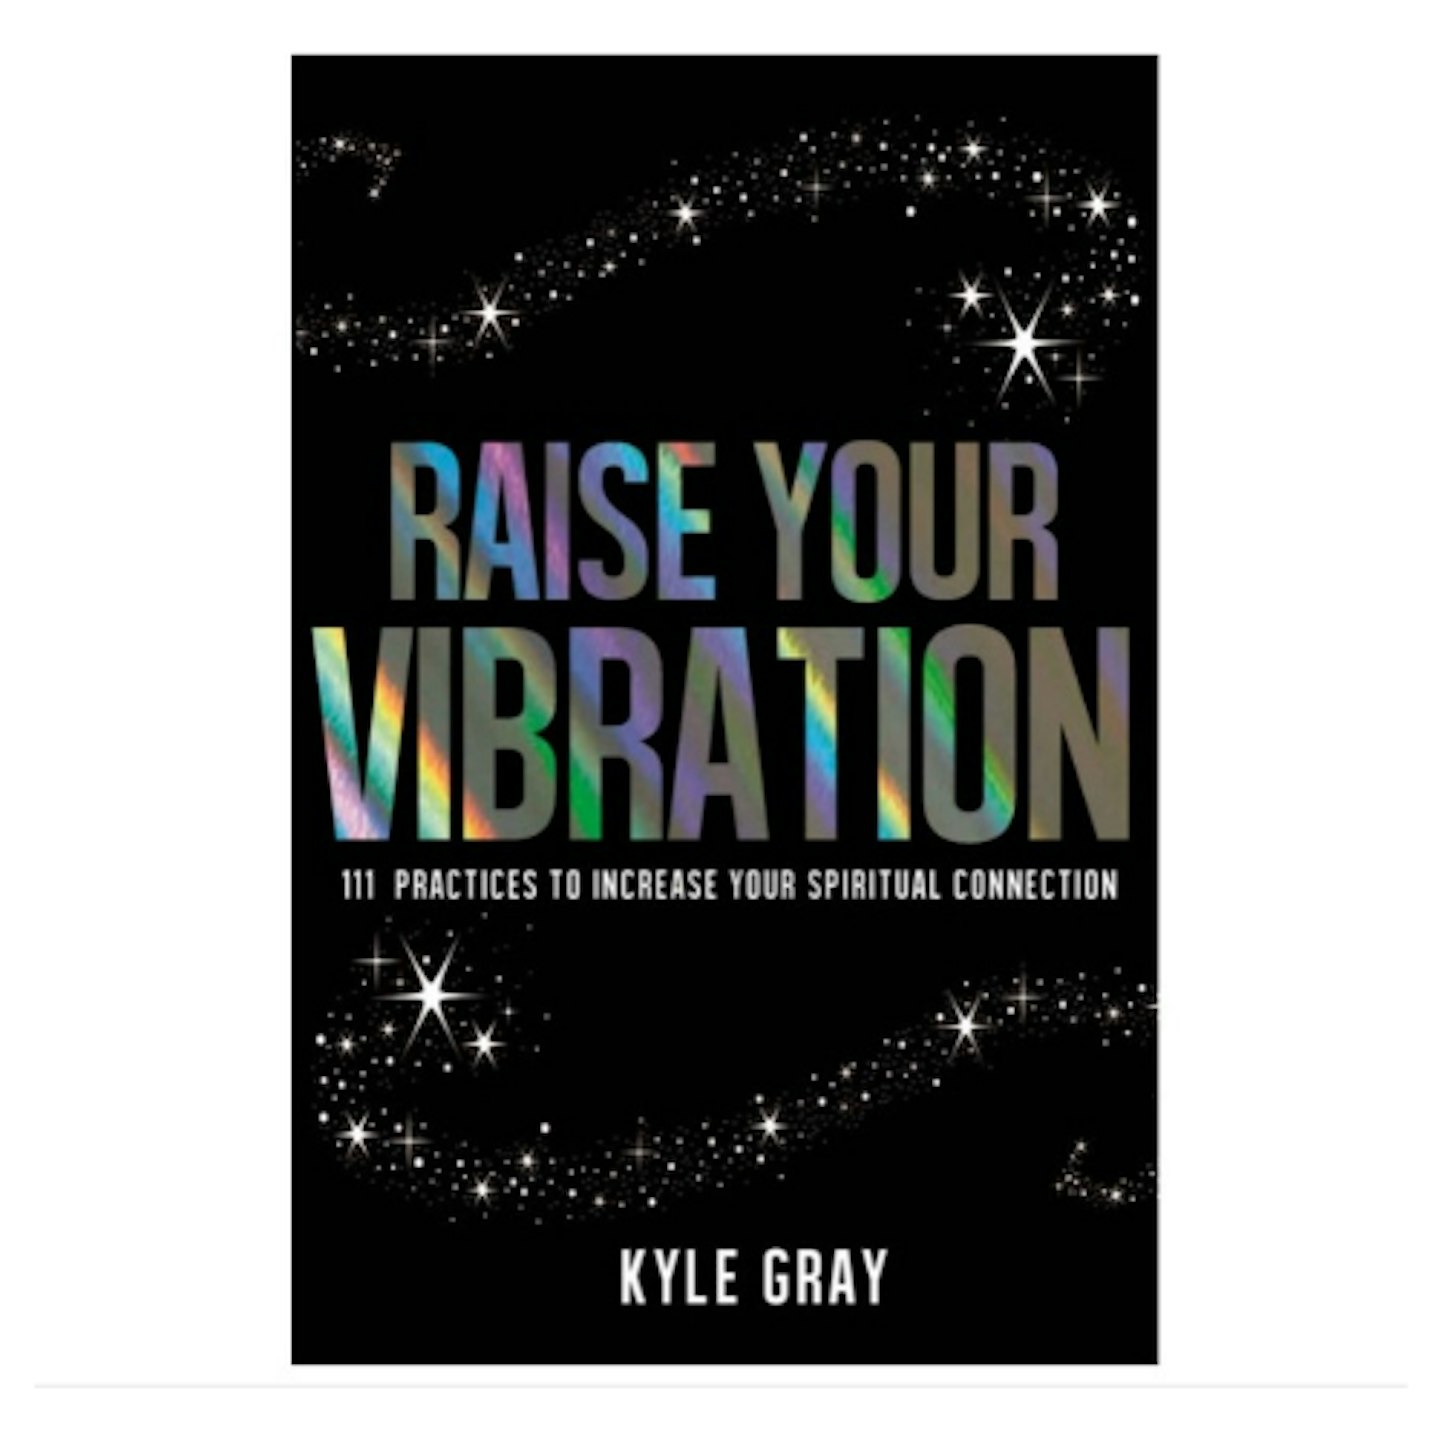 Raise Your Vibration: 111 Practises to Increase Your Spiritual Connection by Kyle Gray